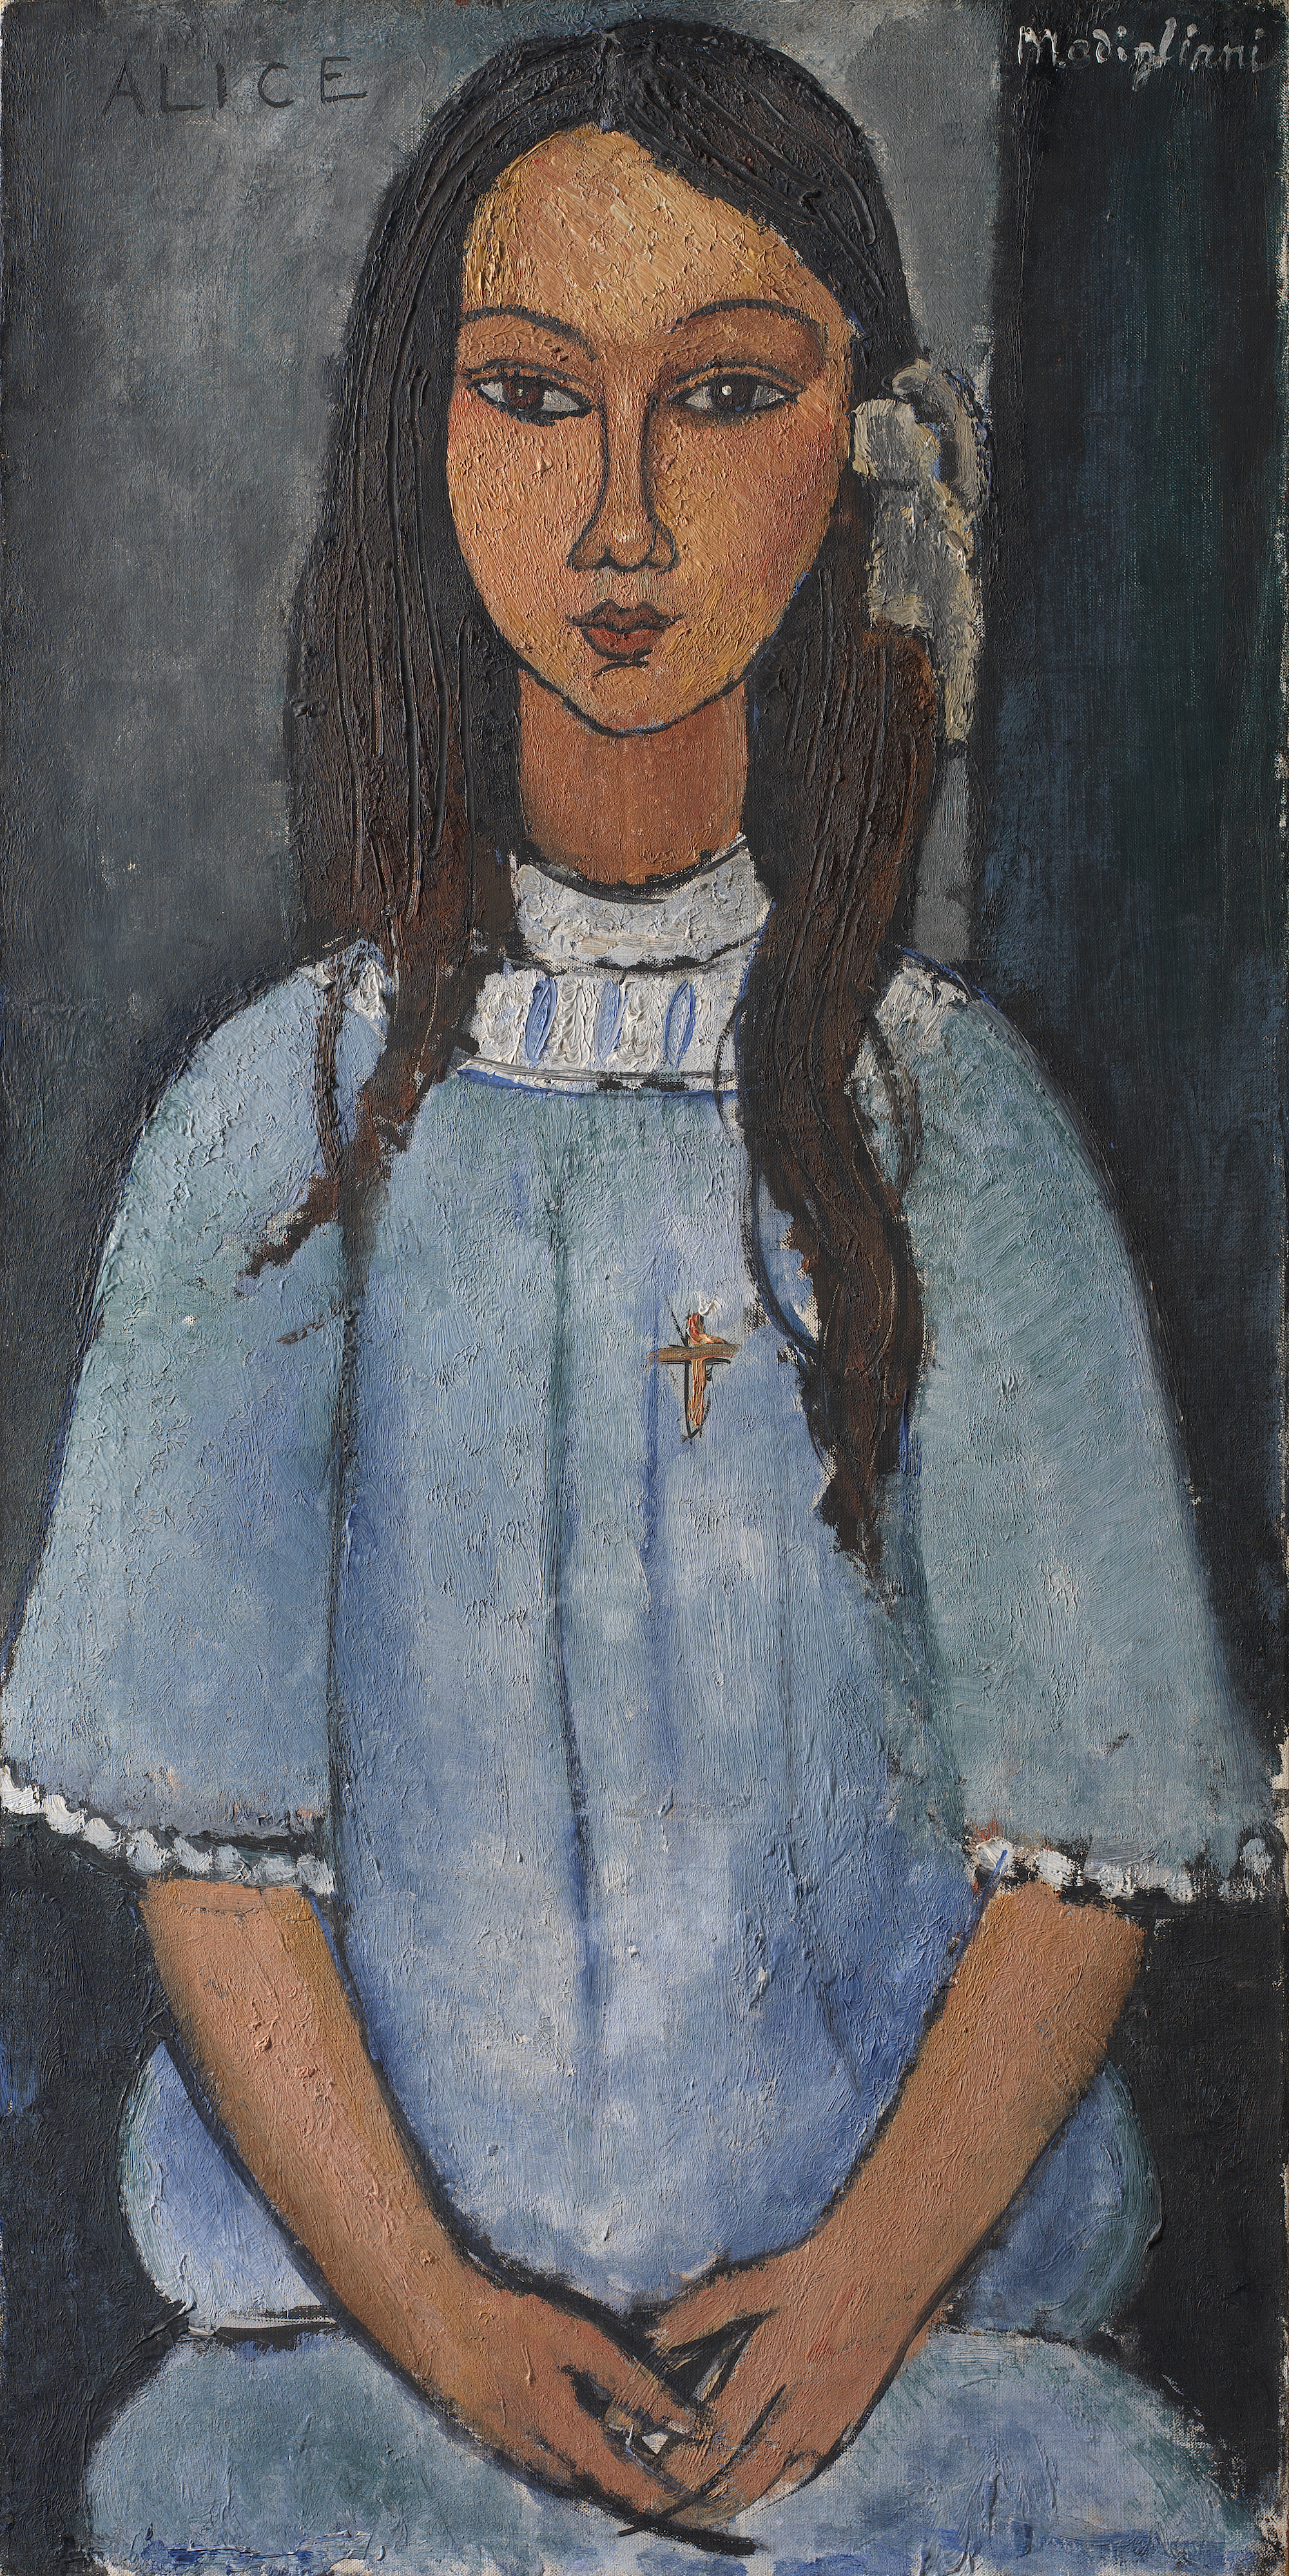 Alice by Amedeo Modigliani - c. 1918 - - Statens Museum for Kunst (SMK)